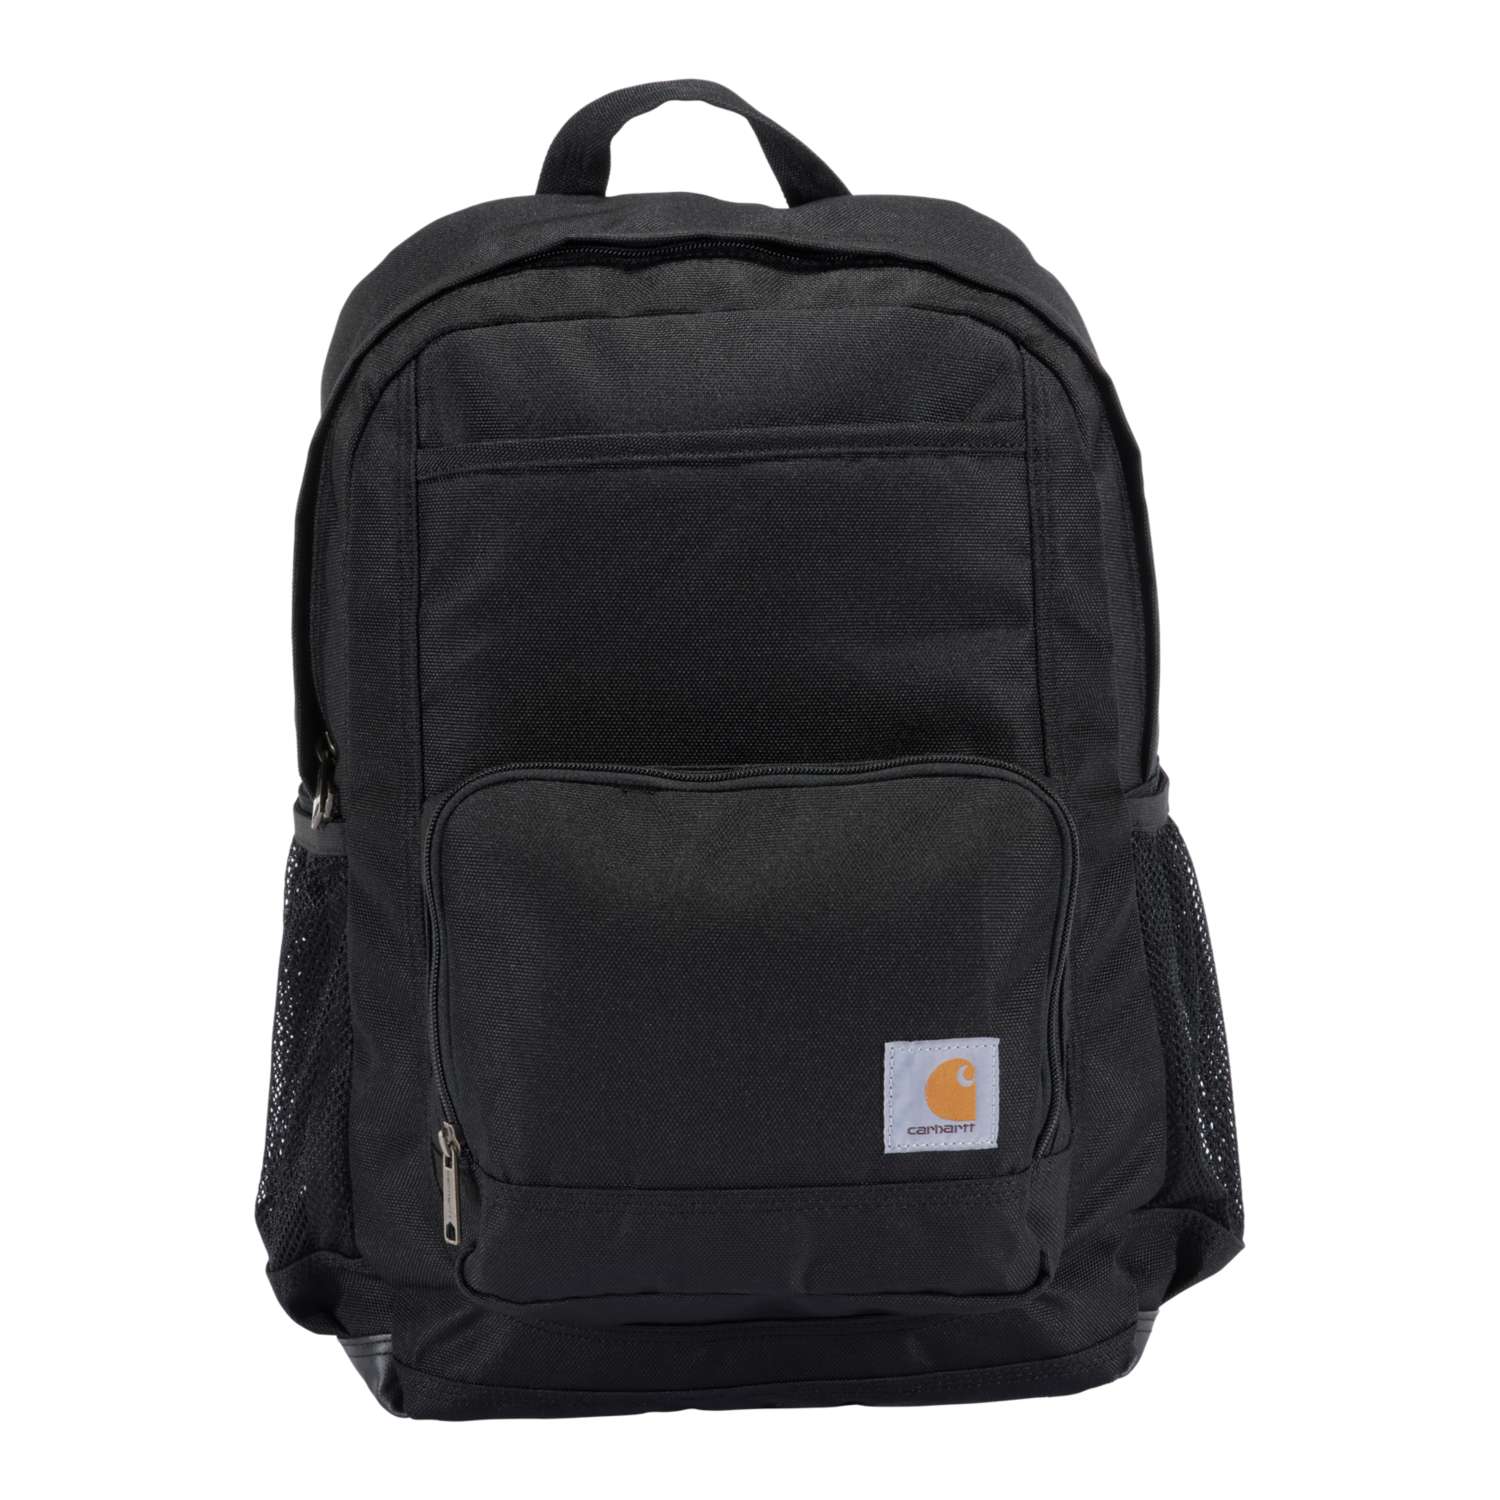 23L_SINGLE-COMPARTMENT_BACKPACK_fyS2njkdkz